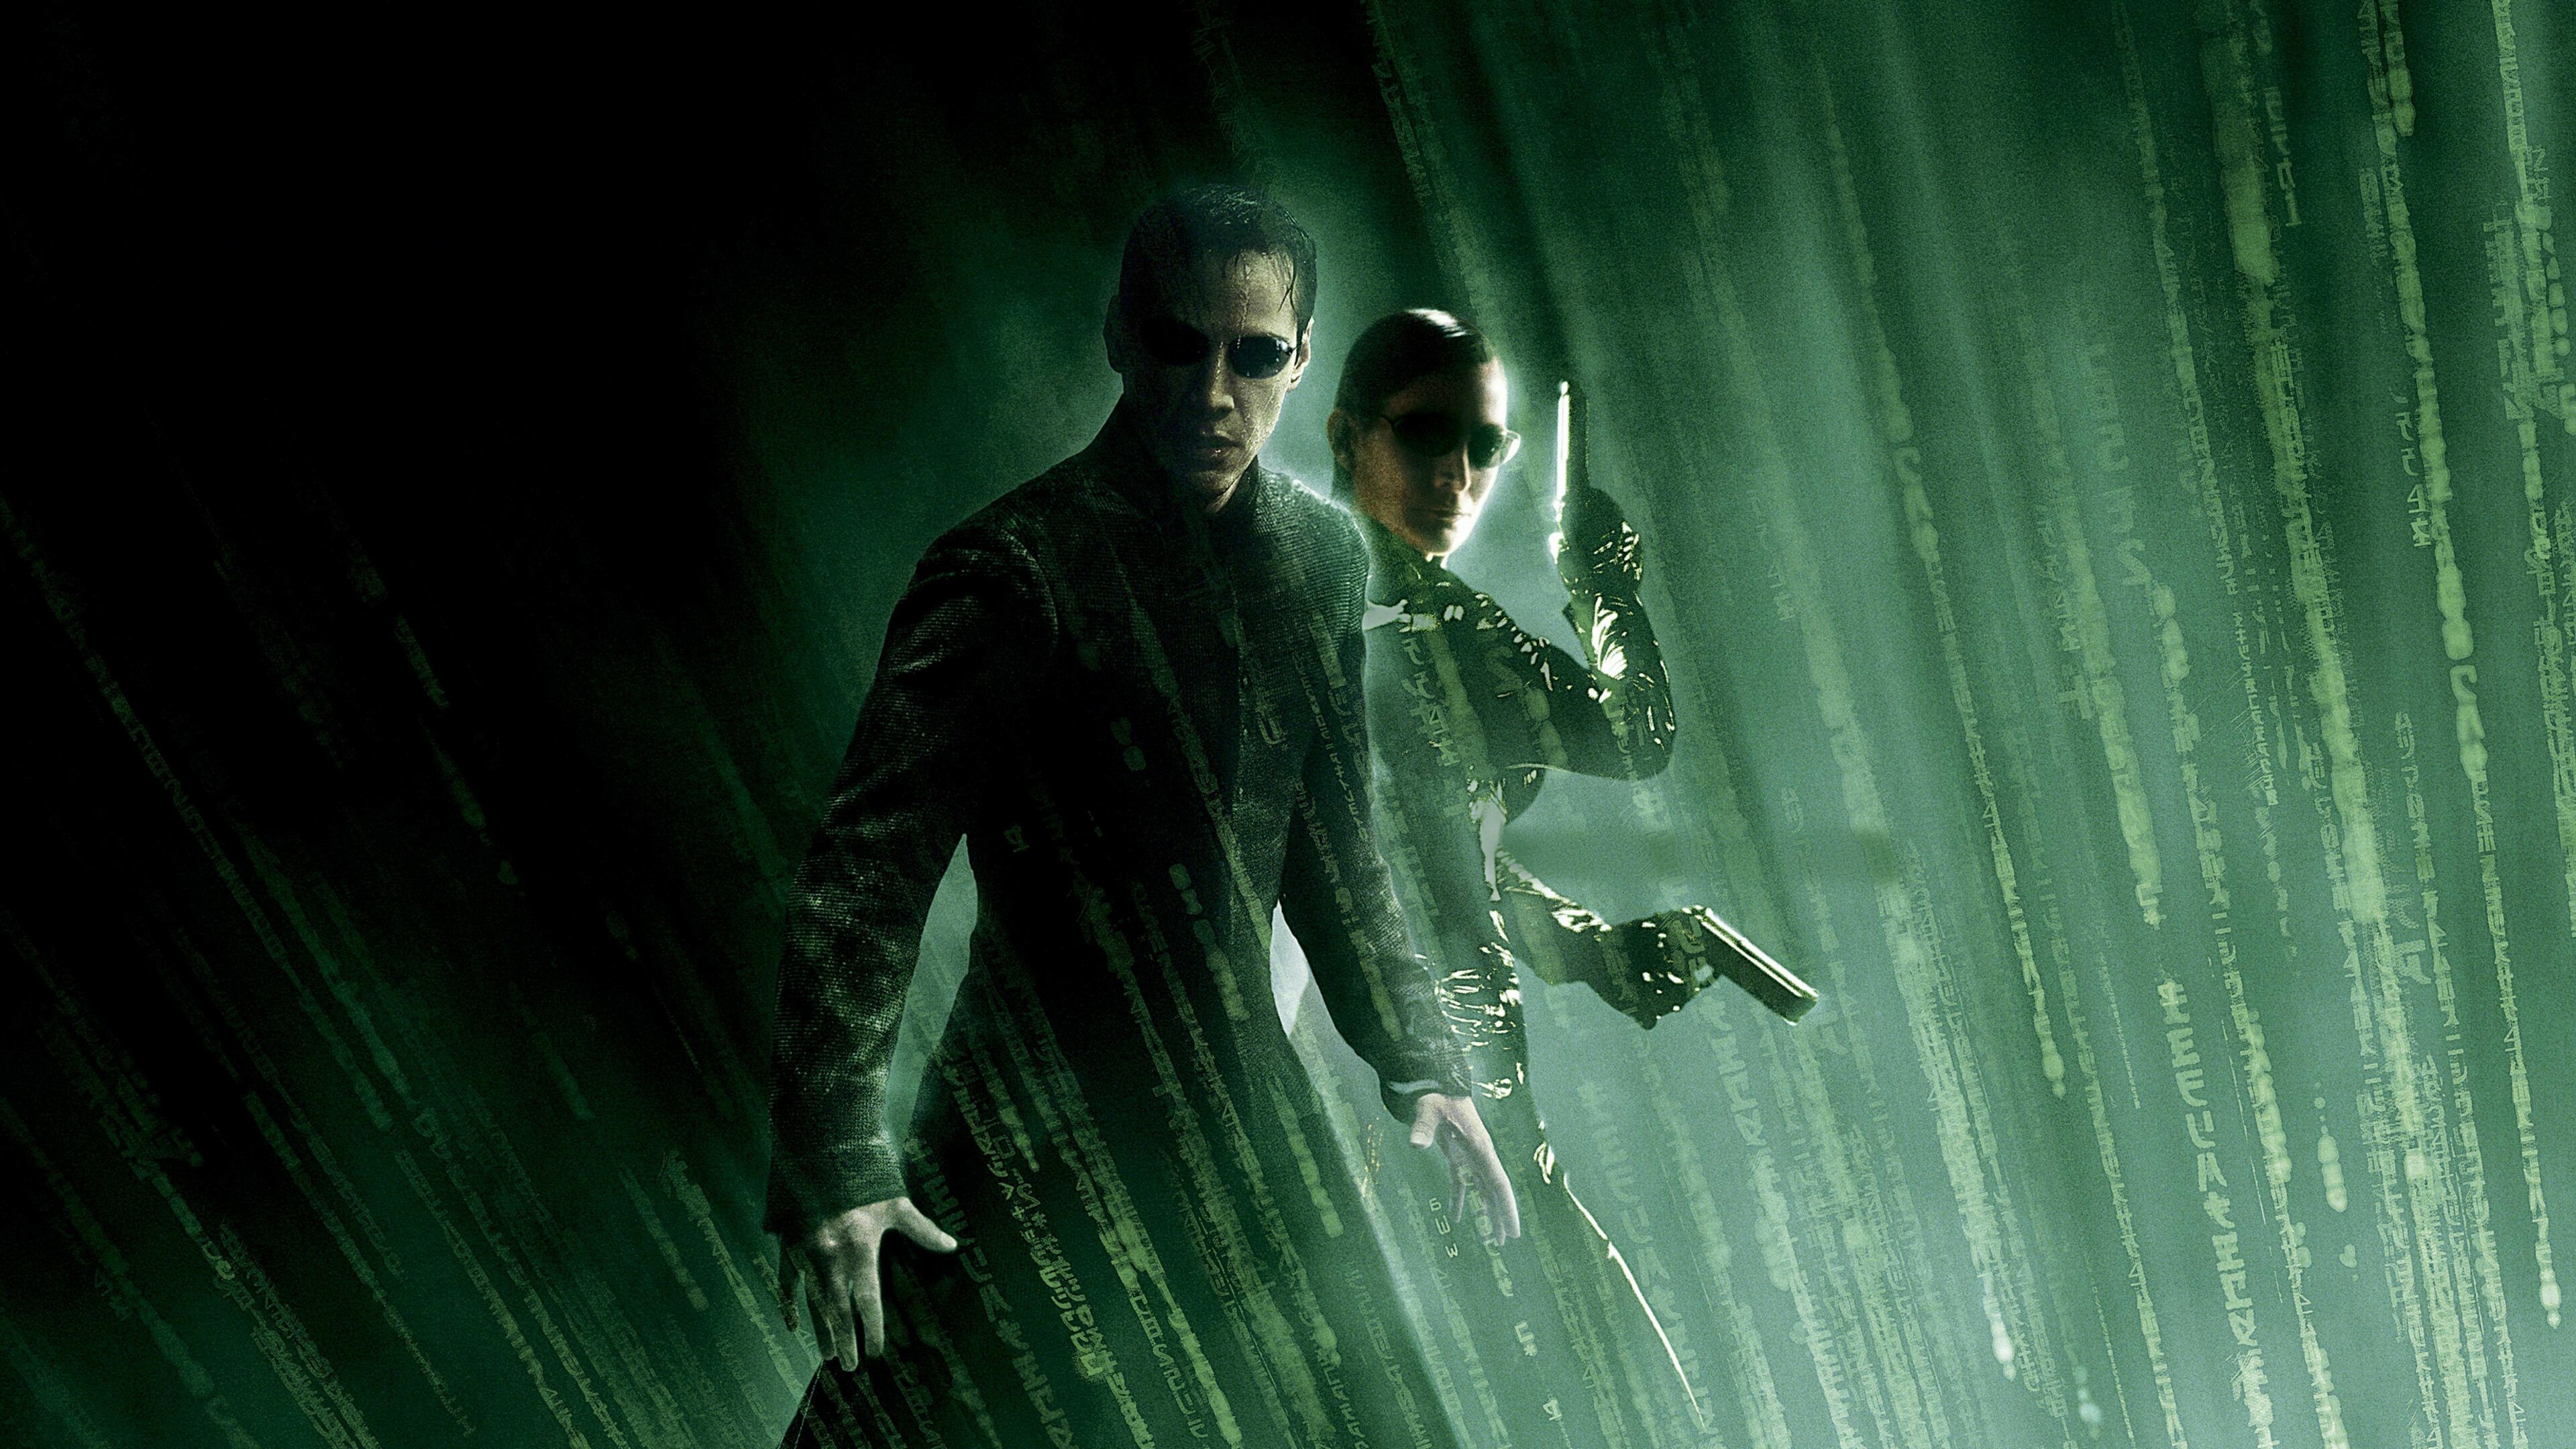 Matrix Franchise: An American media franchise consisting of four feature films, Neo. 3840x2160 4K Wallpaper.